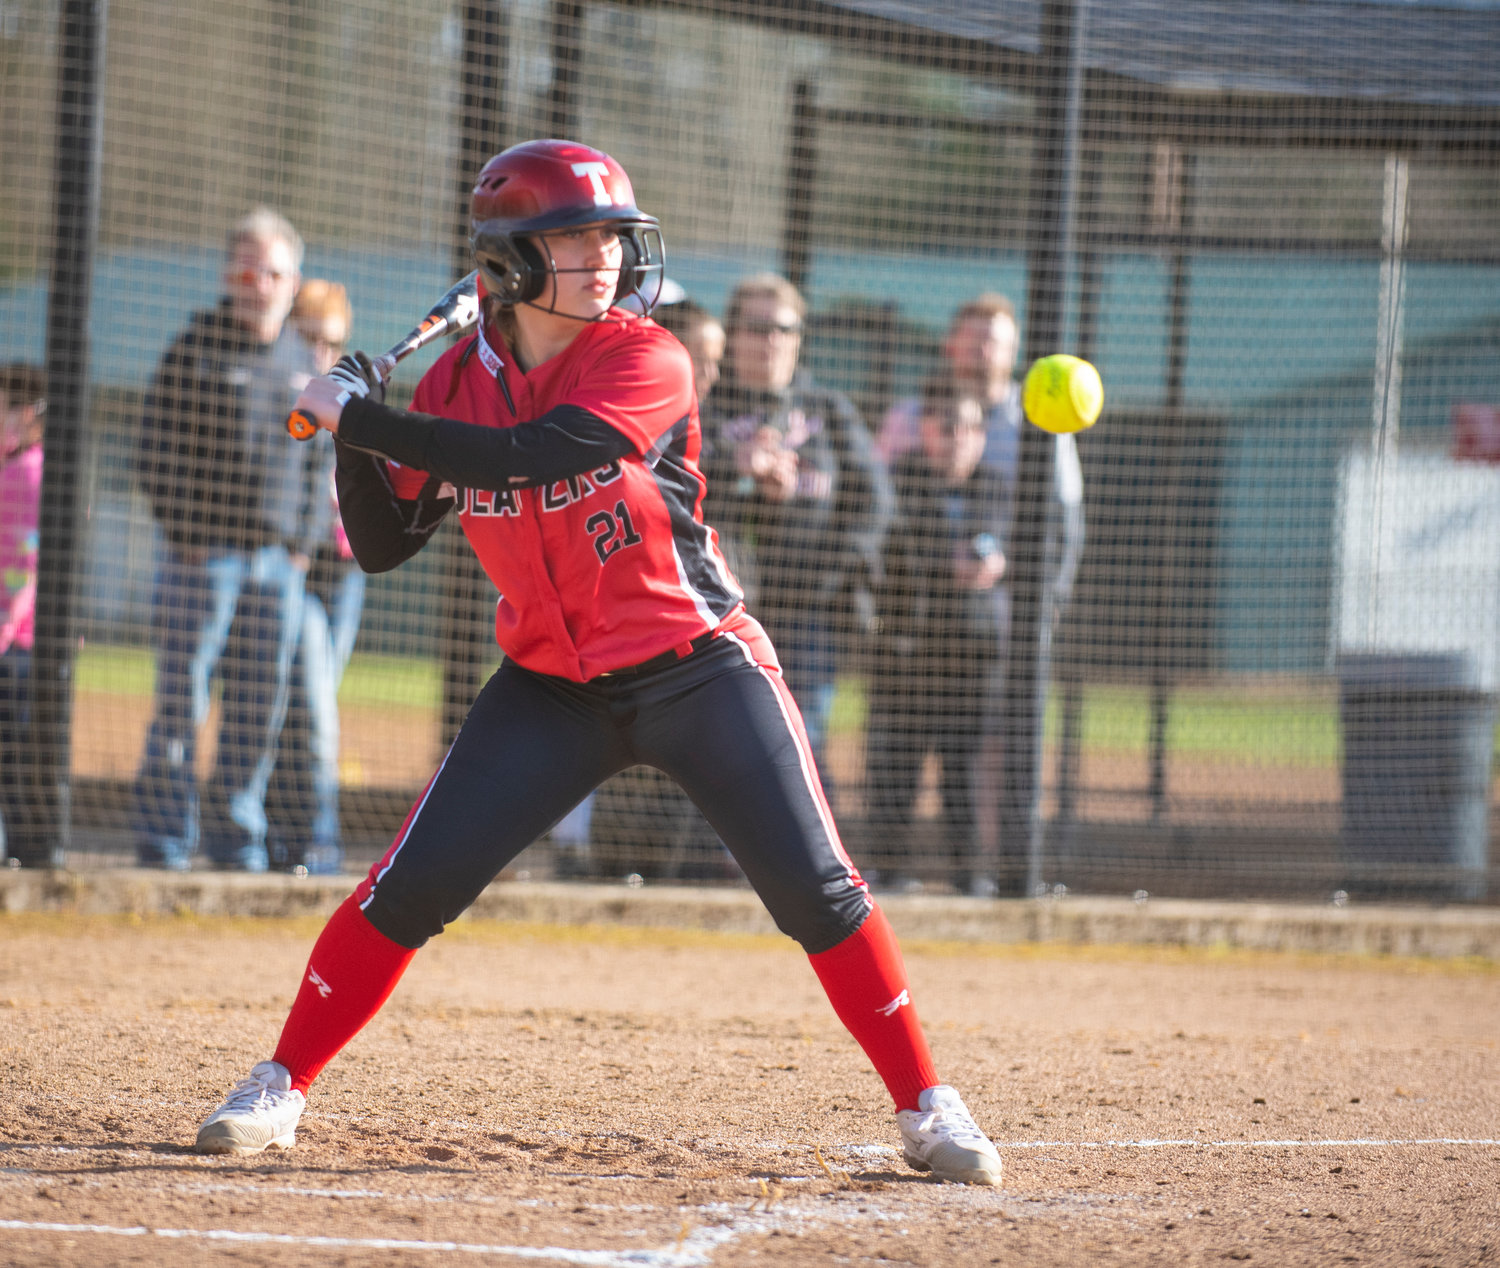 Tenino's Cassie Cannon watches a Centralia pitch go by on Monday.